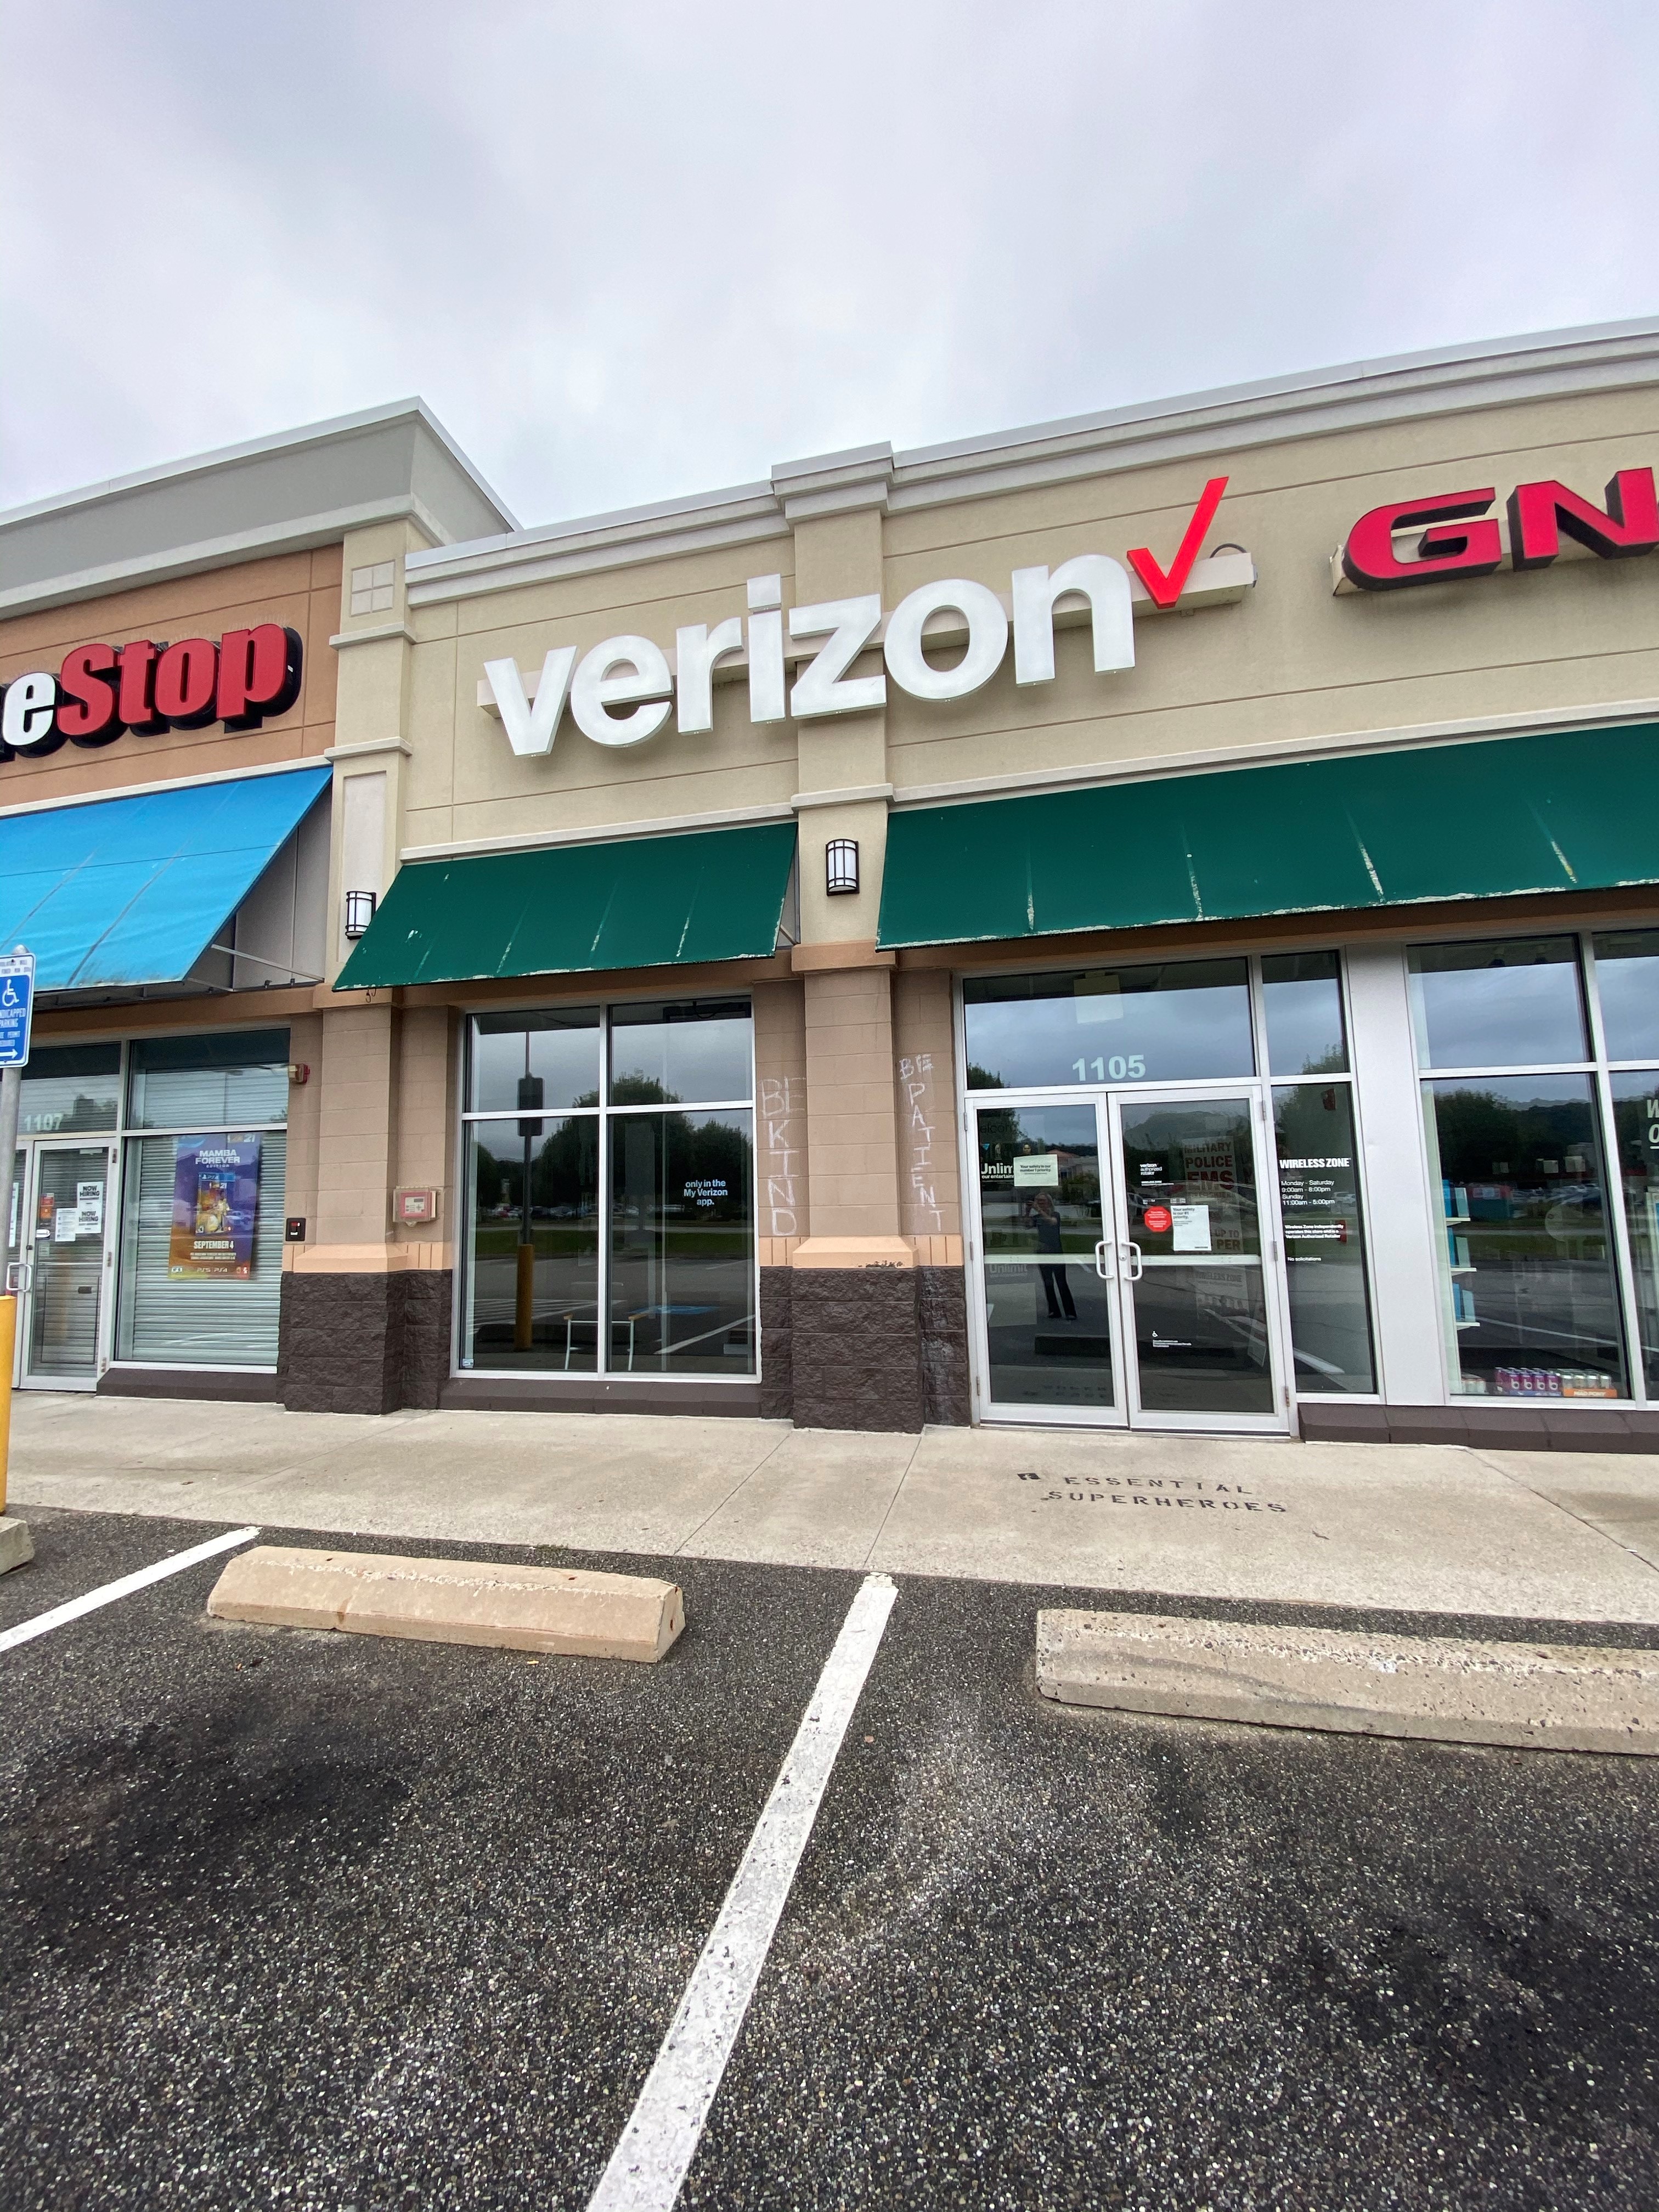 Wireless Zone® of Dayville, Verizon Authorized Retailer
1105 Killingly Commons Dr
Dayville, CT